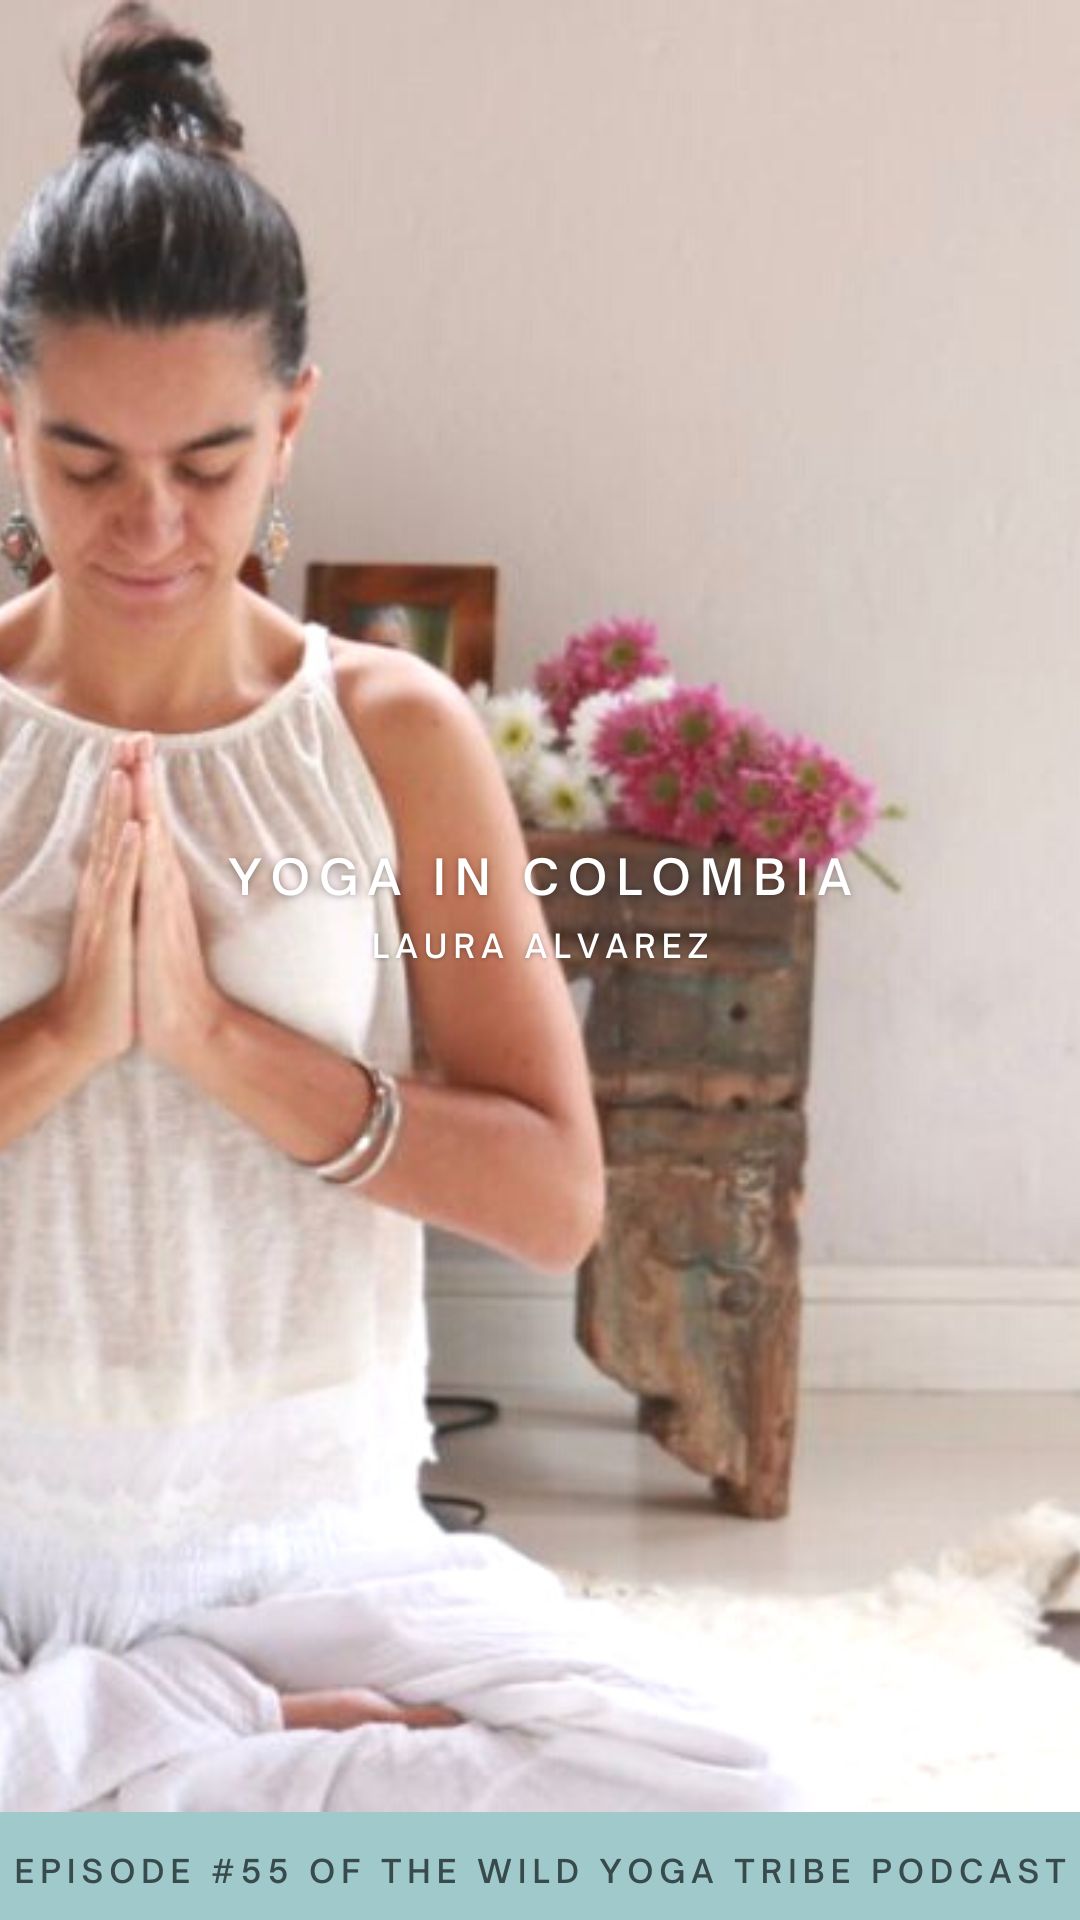 Meet Laura Alvarez, a yoga teacher from Colombia, who shares with us all about how yoga in infinite, and as long as we are students on the path of yoga— we will never stop learning. Welcome to Happy Yoga in Colombia!